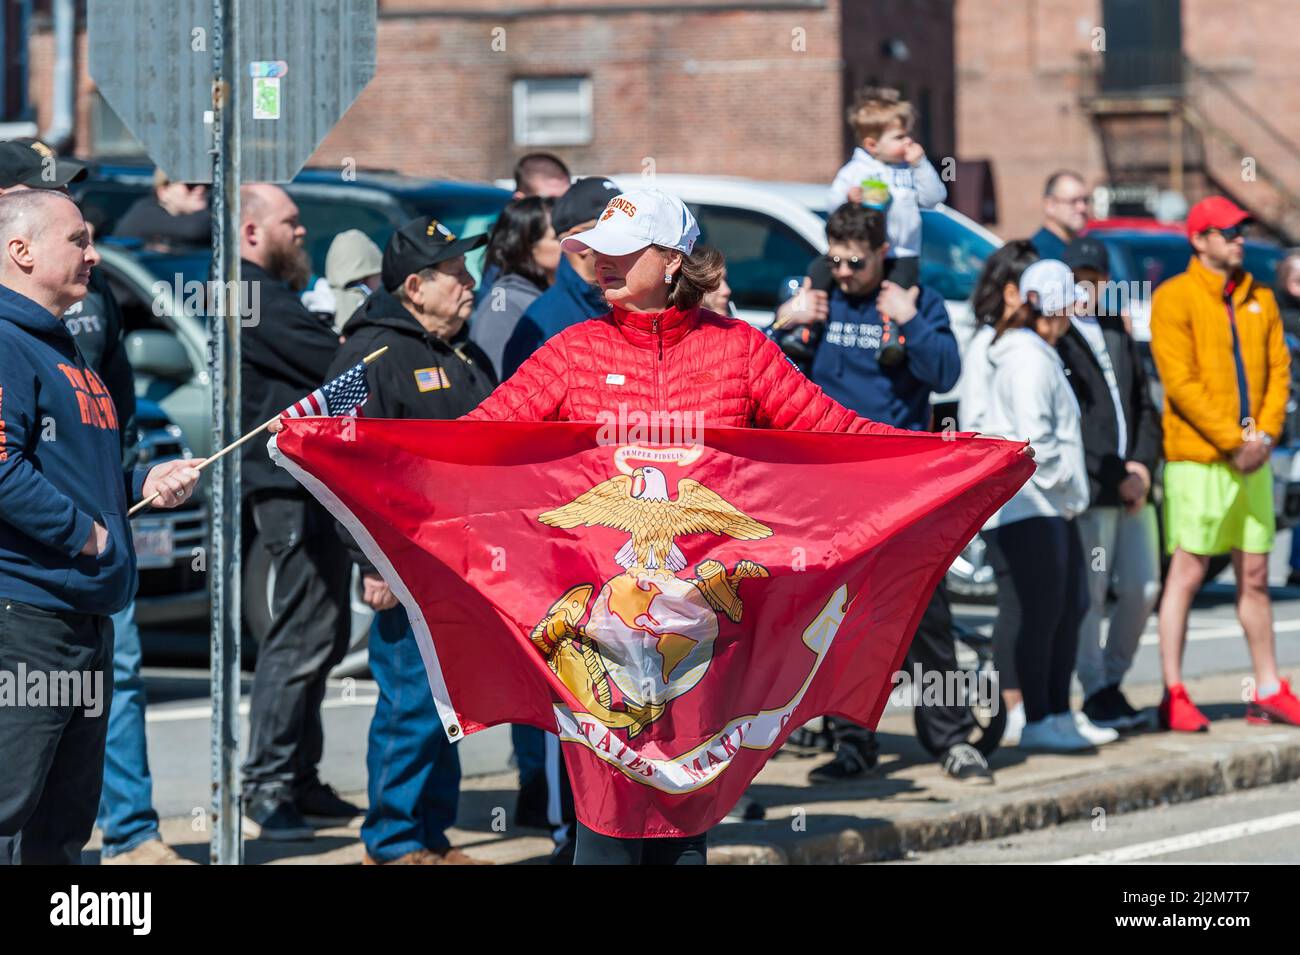 Woman holding a US Marines flag at procession for fallen USMC CPT Ross Reynolds, returning to hometown of Leominster, Massachusetts Stock Photo